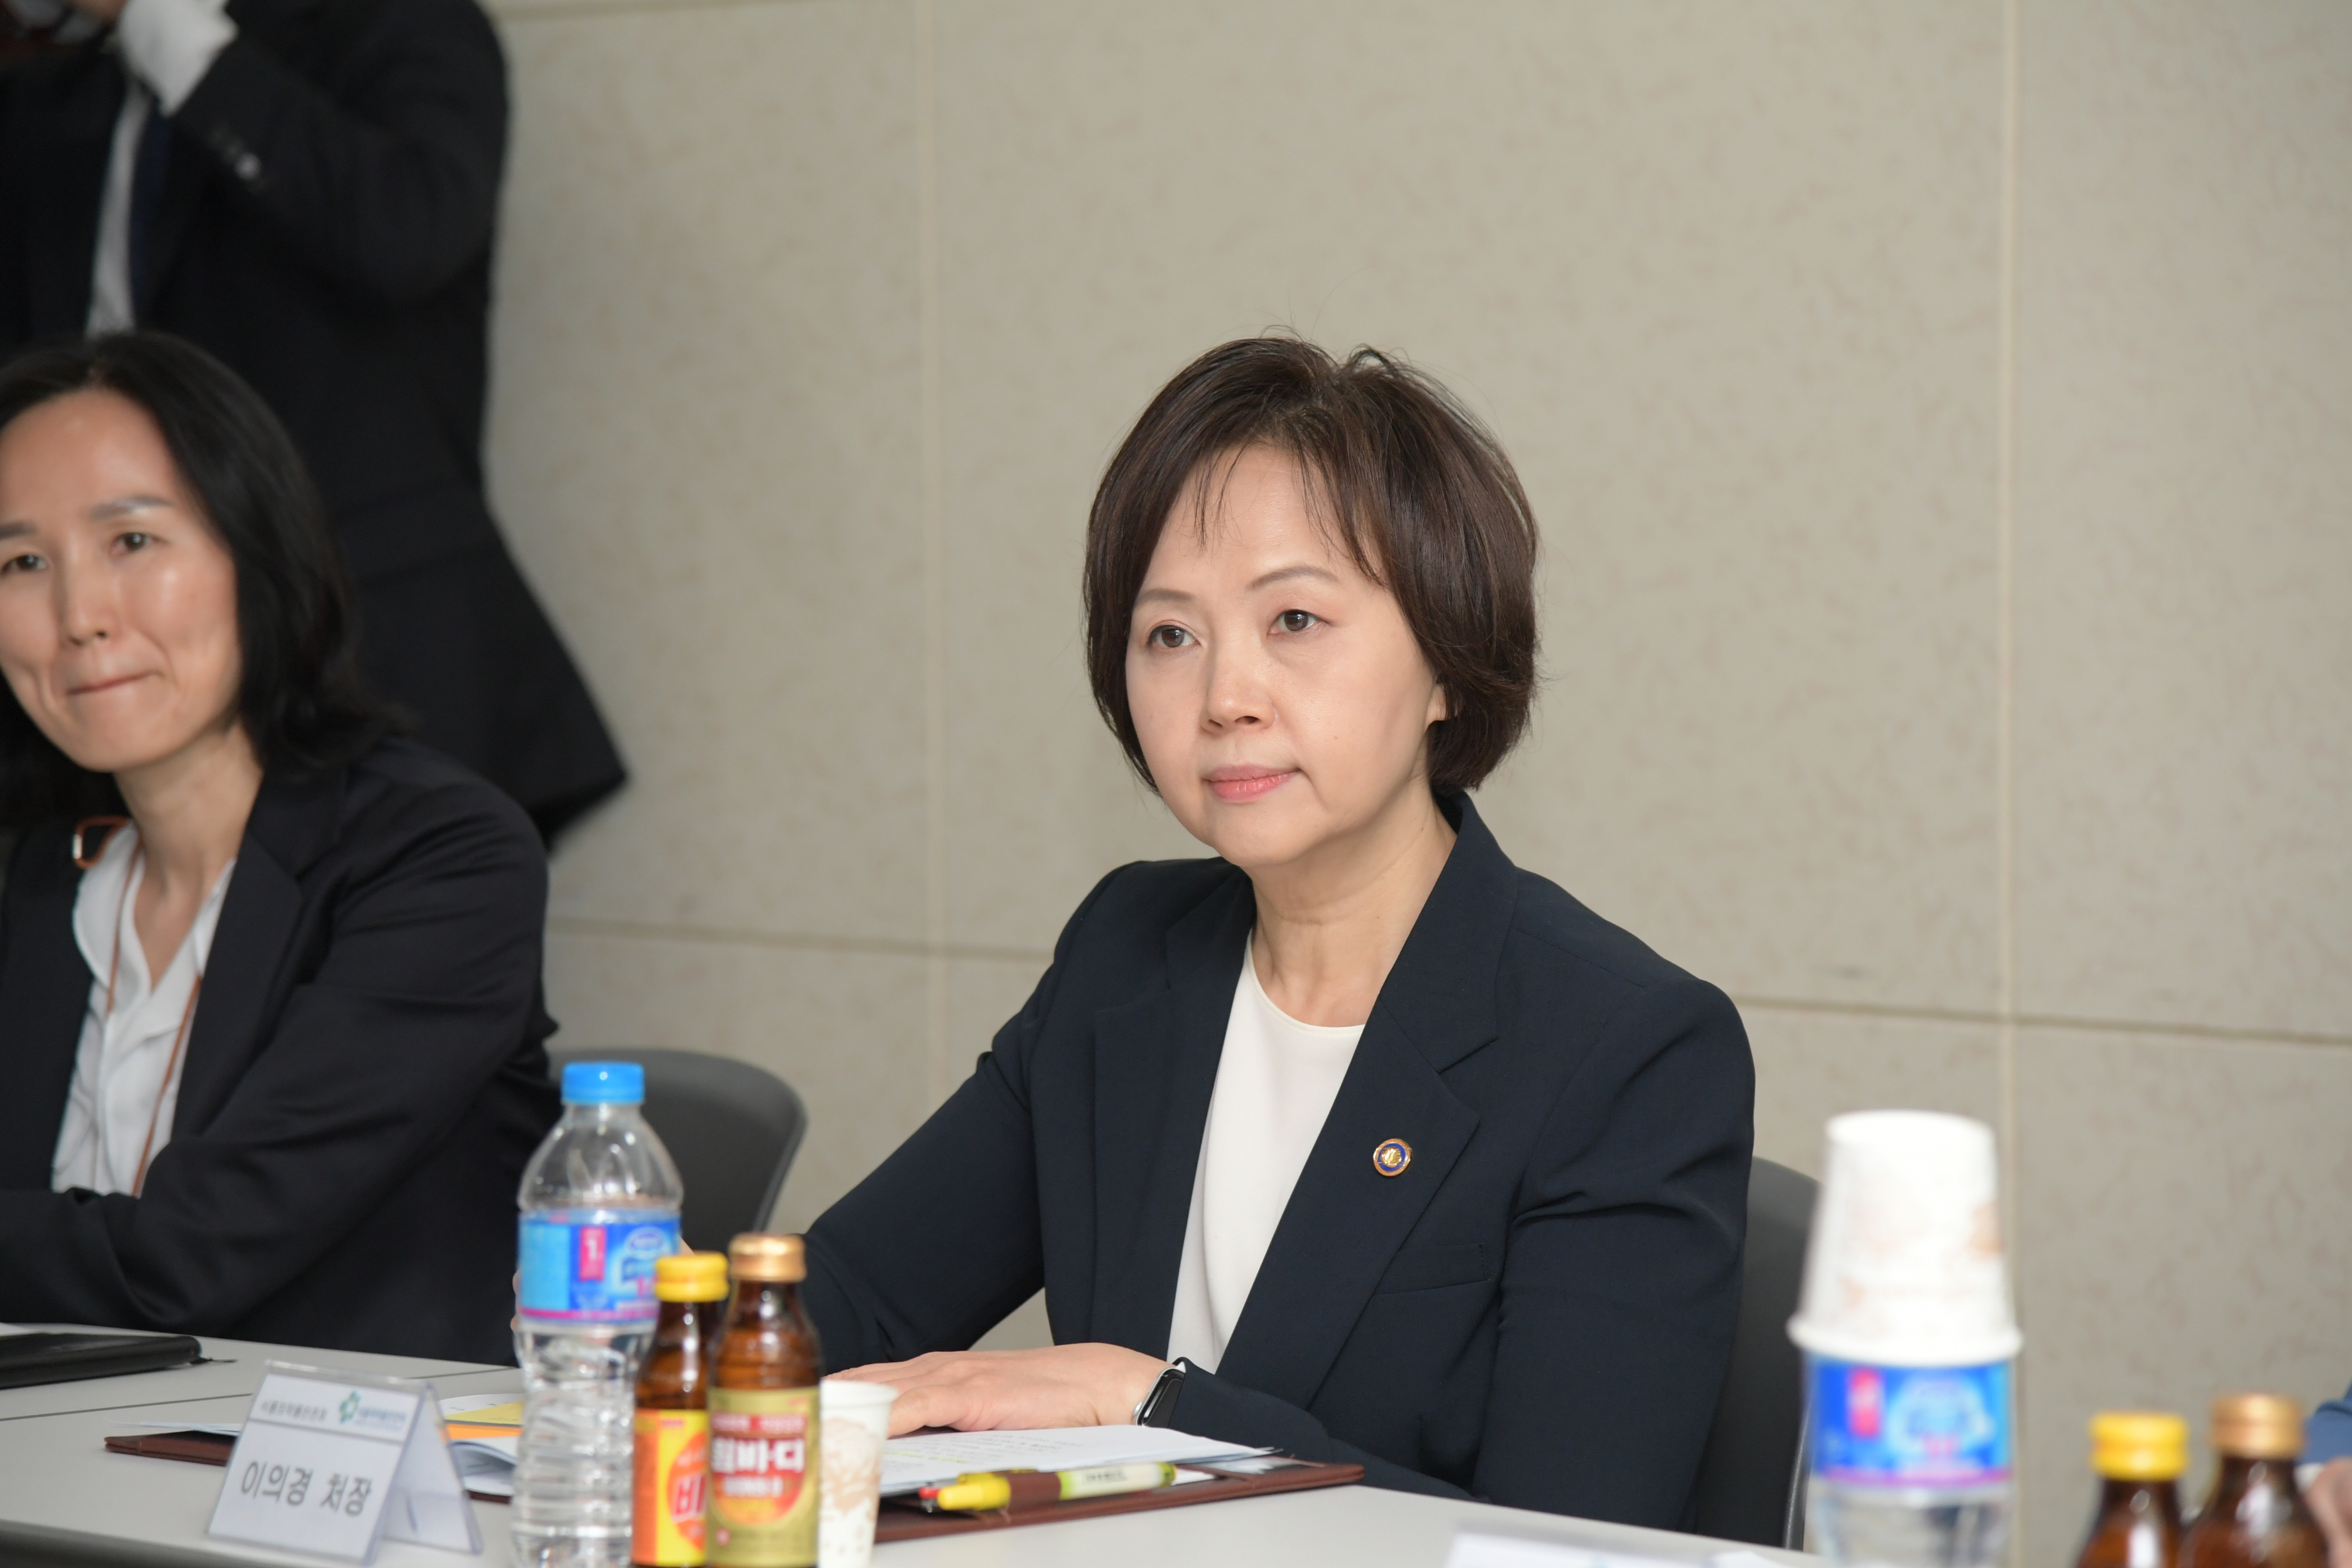 Photo News1 - [May 22, 2020] Minister inspects influenza vaccine manufacturing sites and attends pharmaceutical industry conference